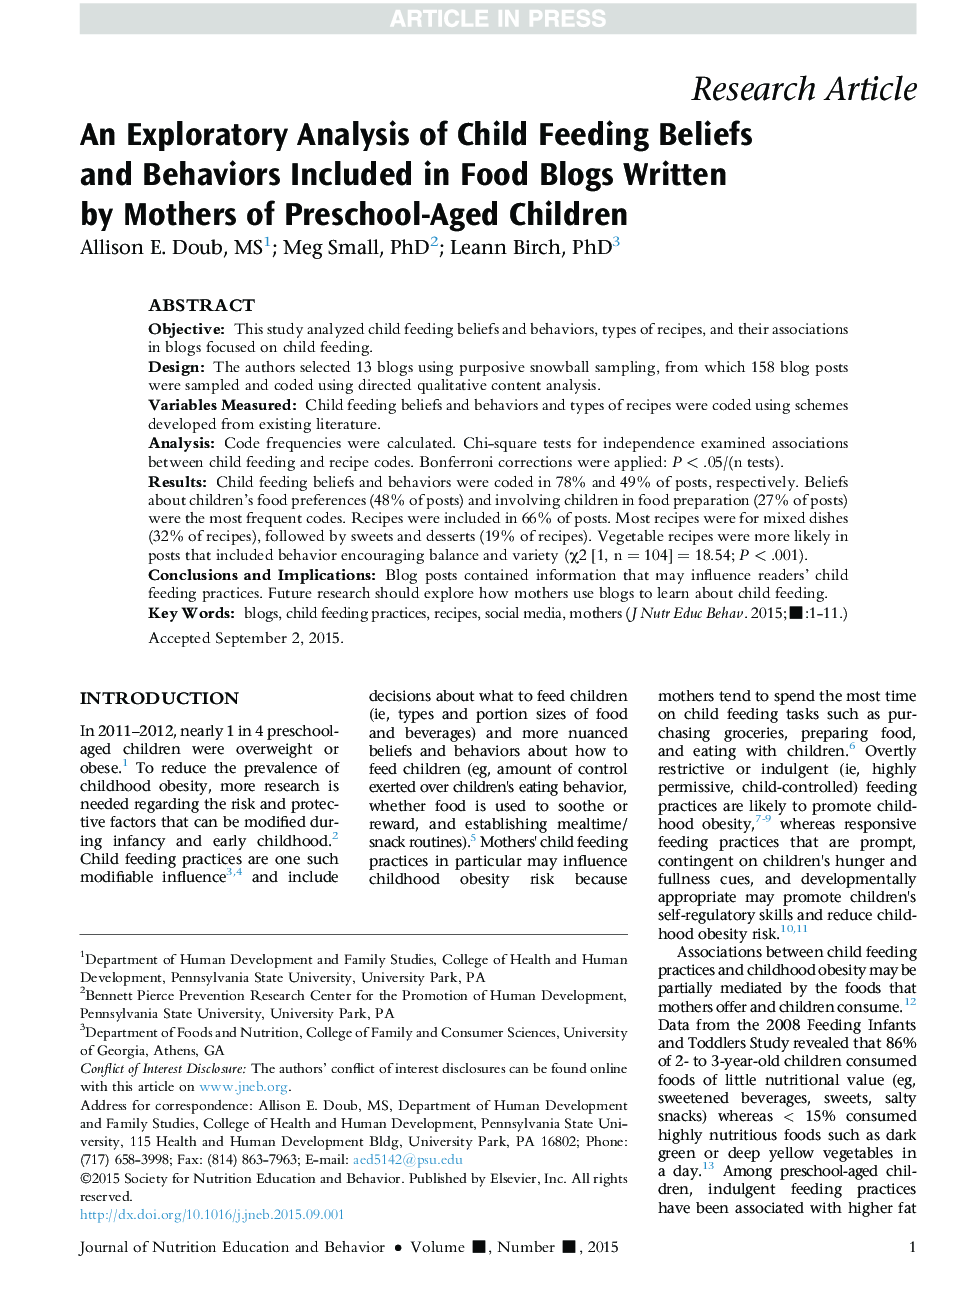 An Exploratory Analysis of Child Feeding Beliefs and Behaviors Included in Food Blogs Written by Mothers of Preschool-Aged Children